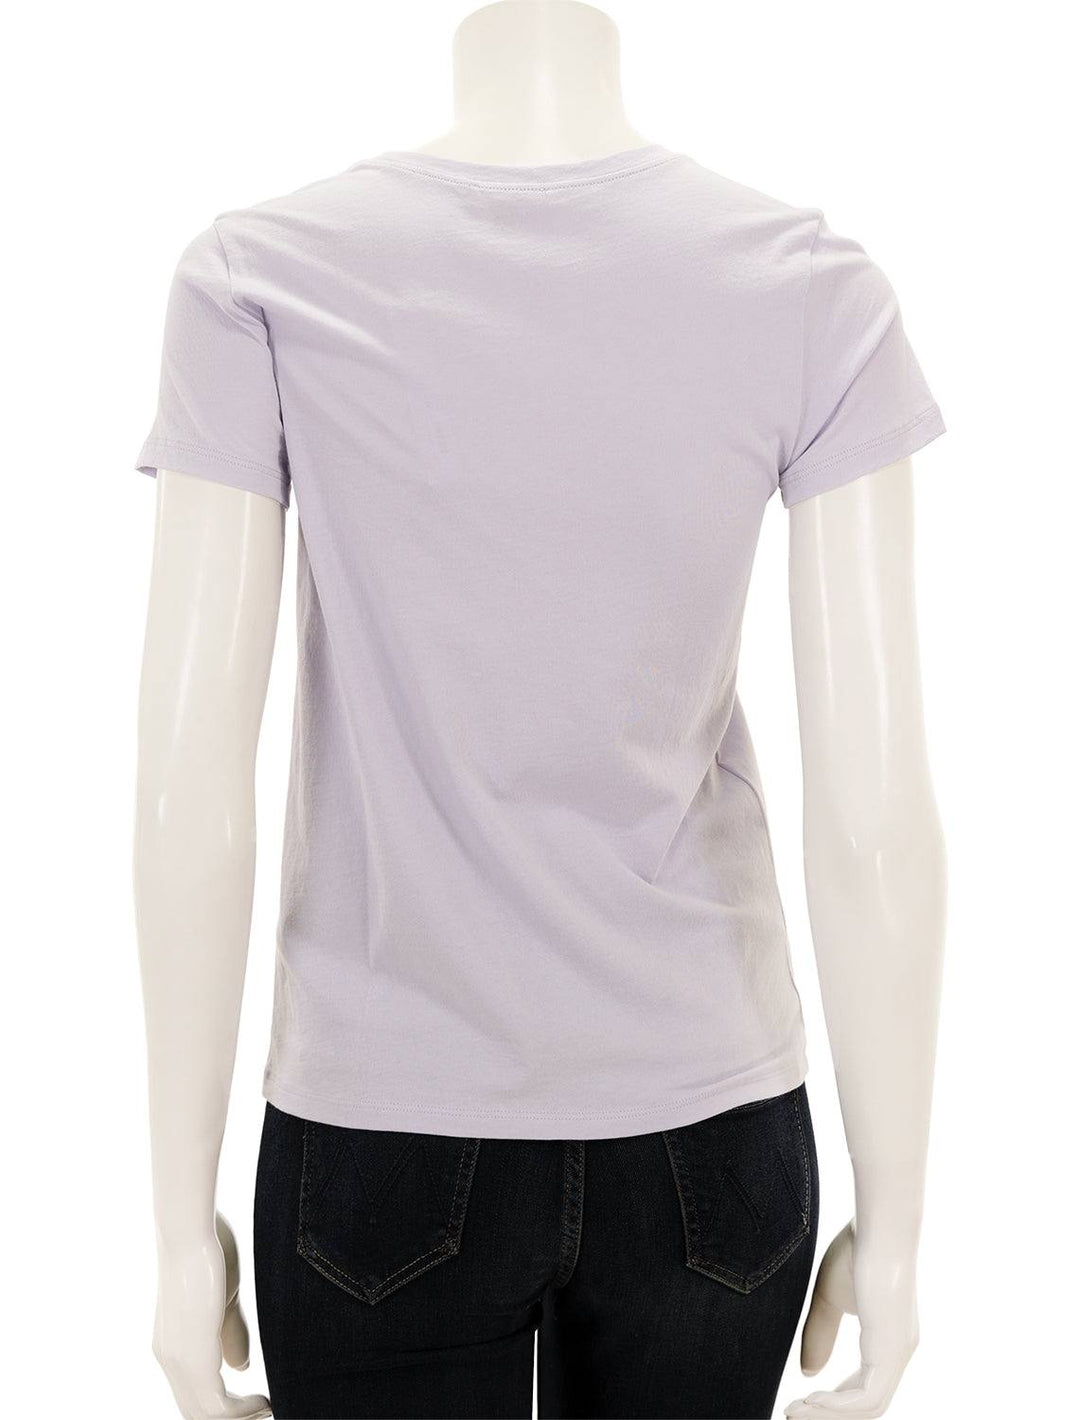 Back view of Lilla P's short sleeve crewneck in lily.